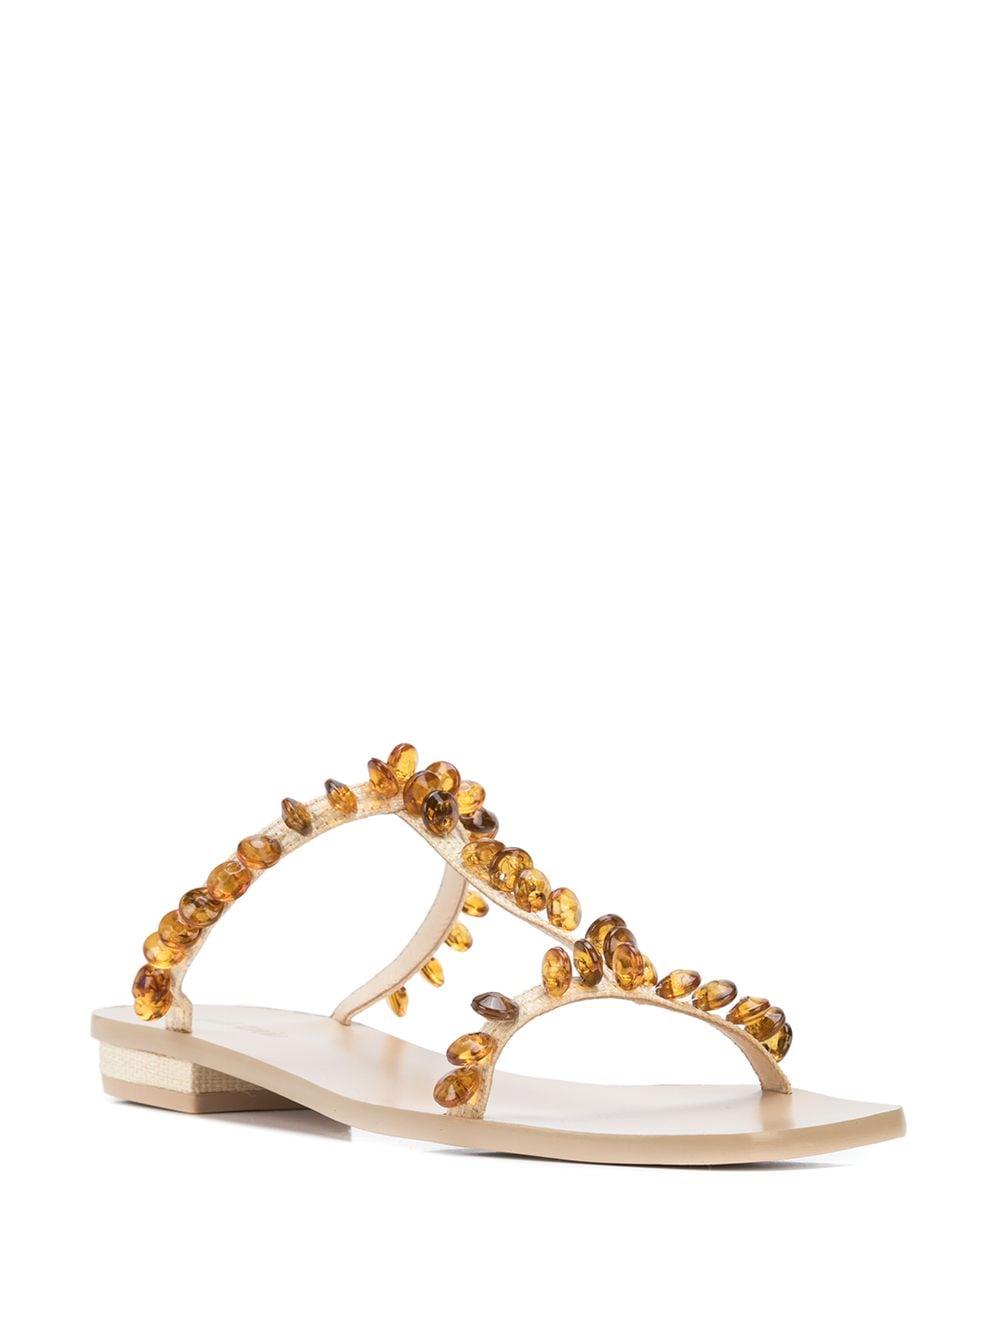 Cult Gaia Leather Ines Beaded Sandals - Lyst